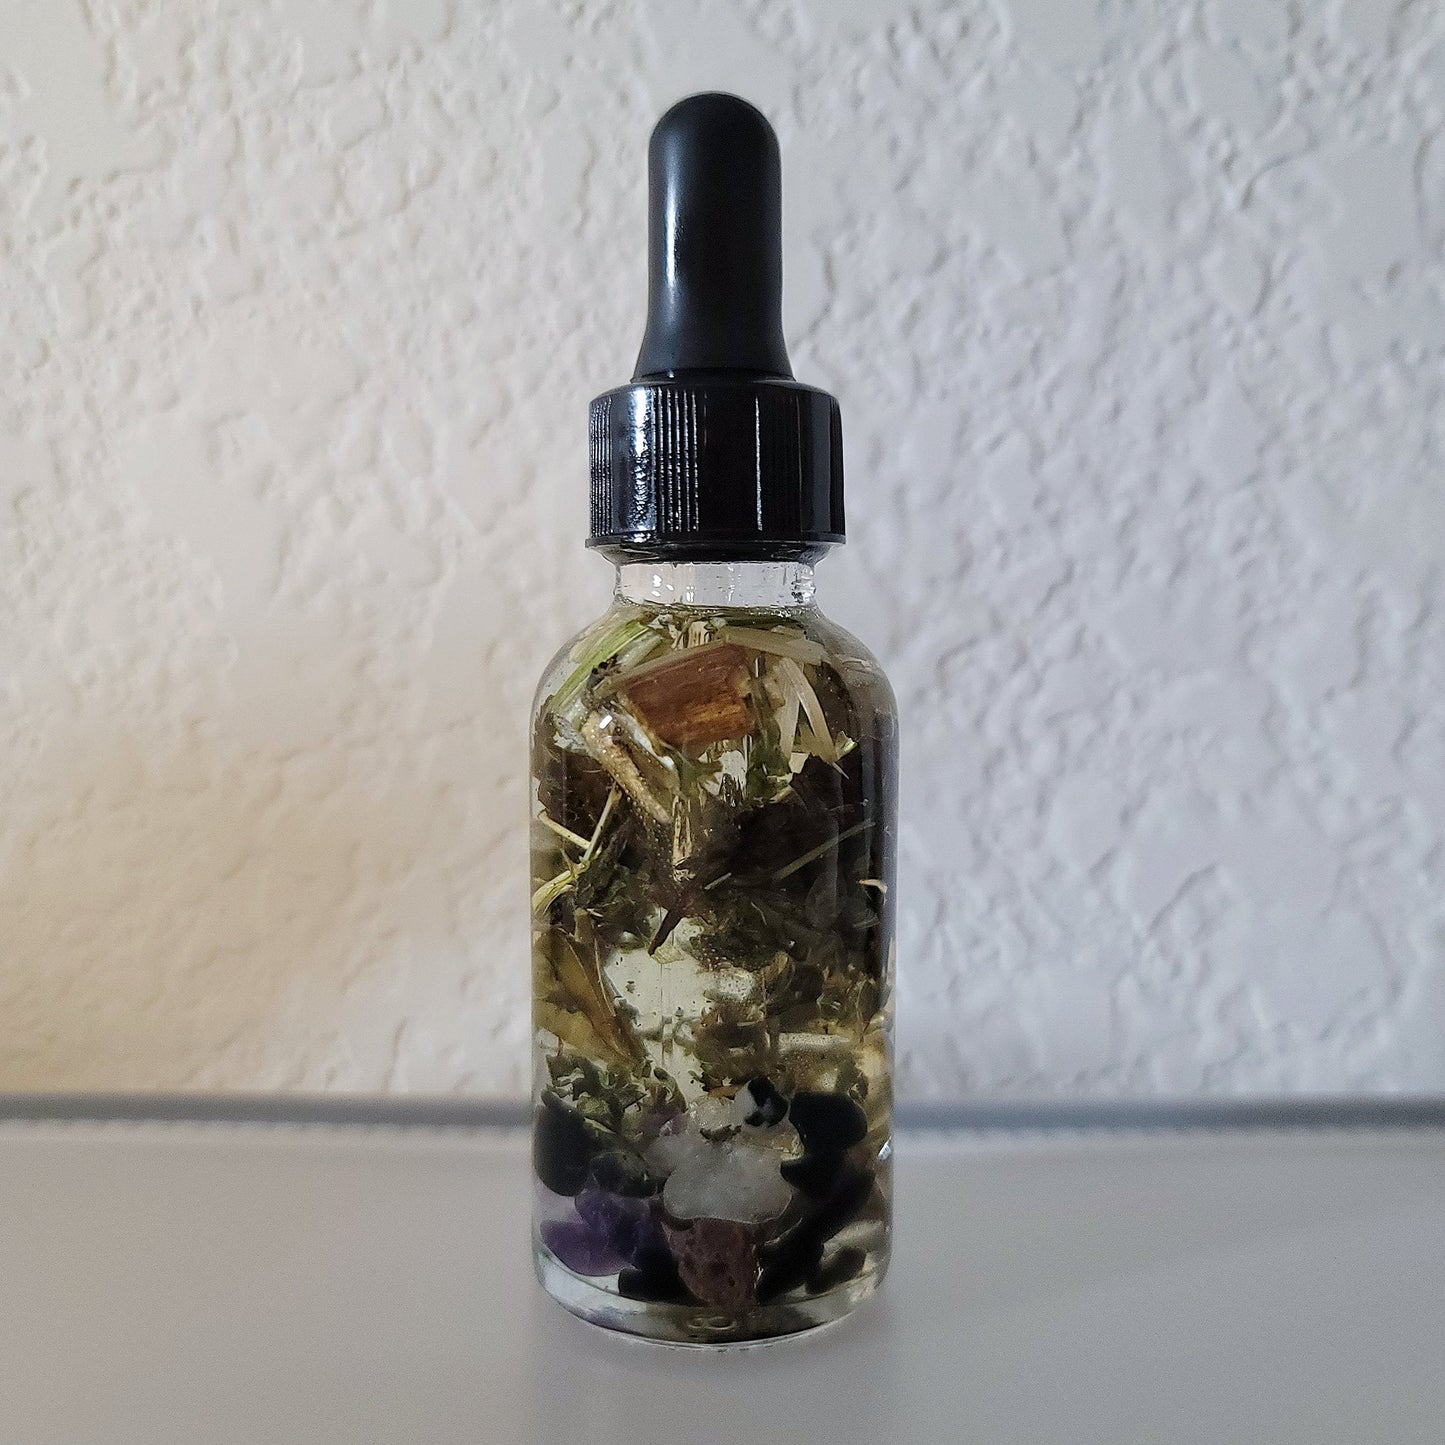 Triple Goddess Oil | Ritual & Spell Work, Altars, Invocation, Manifestation, and Intentions